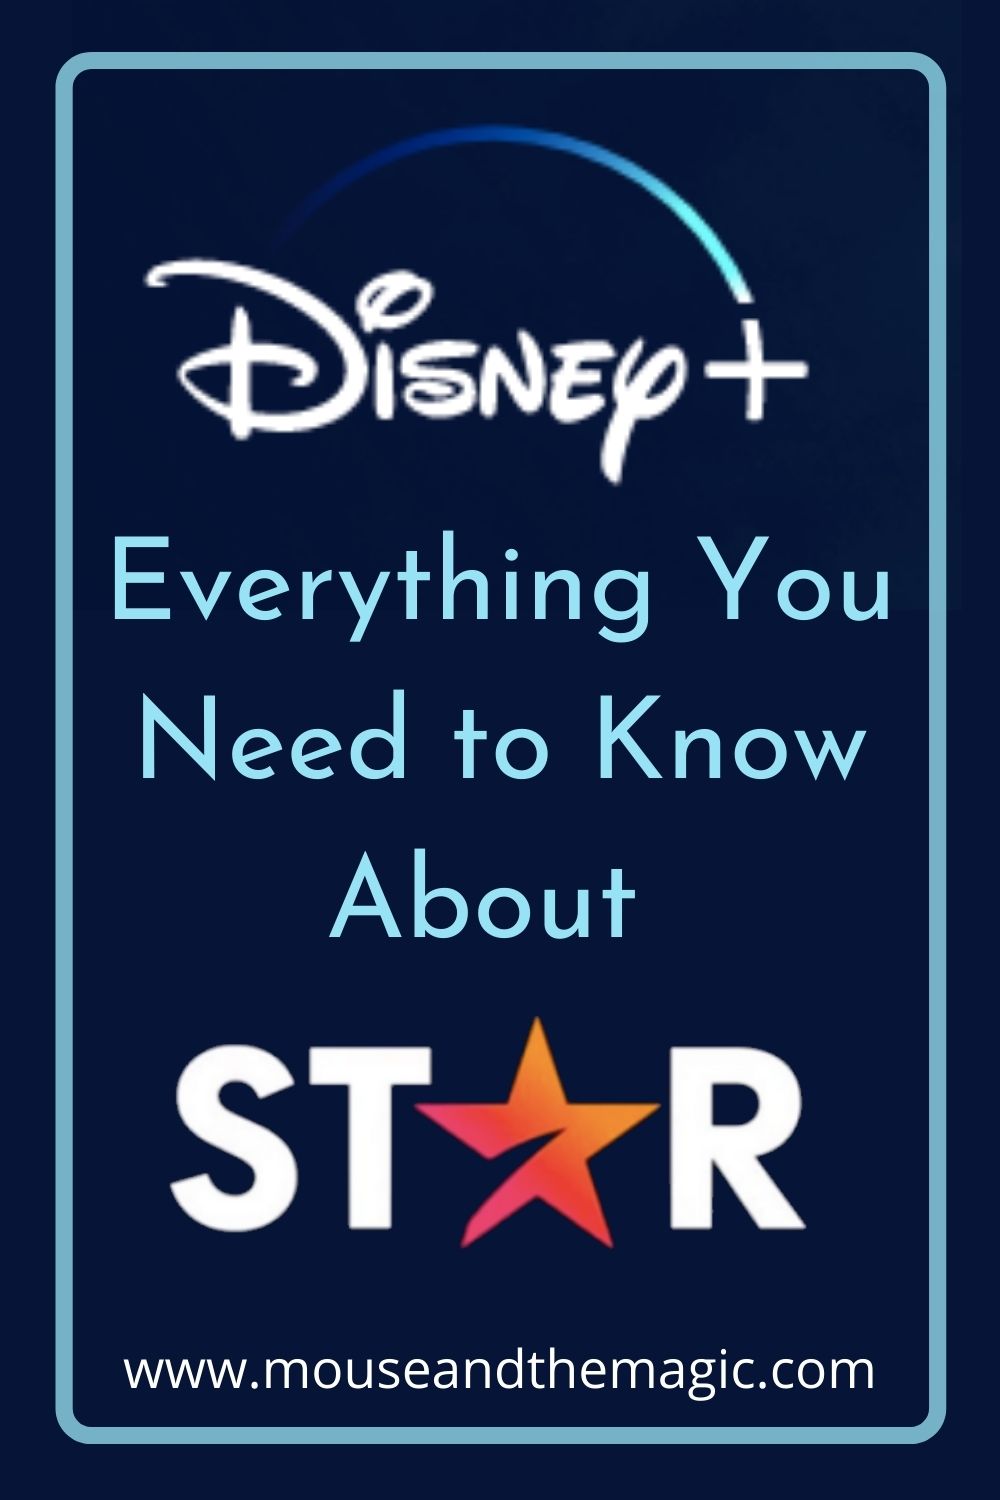 Disney Plus - Everything You Need to Know about Disney Star